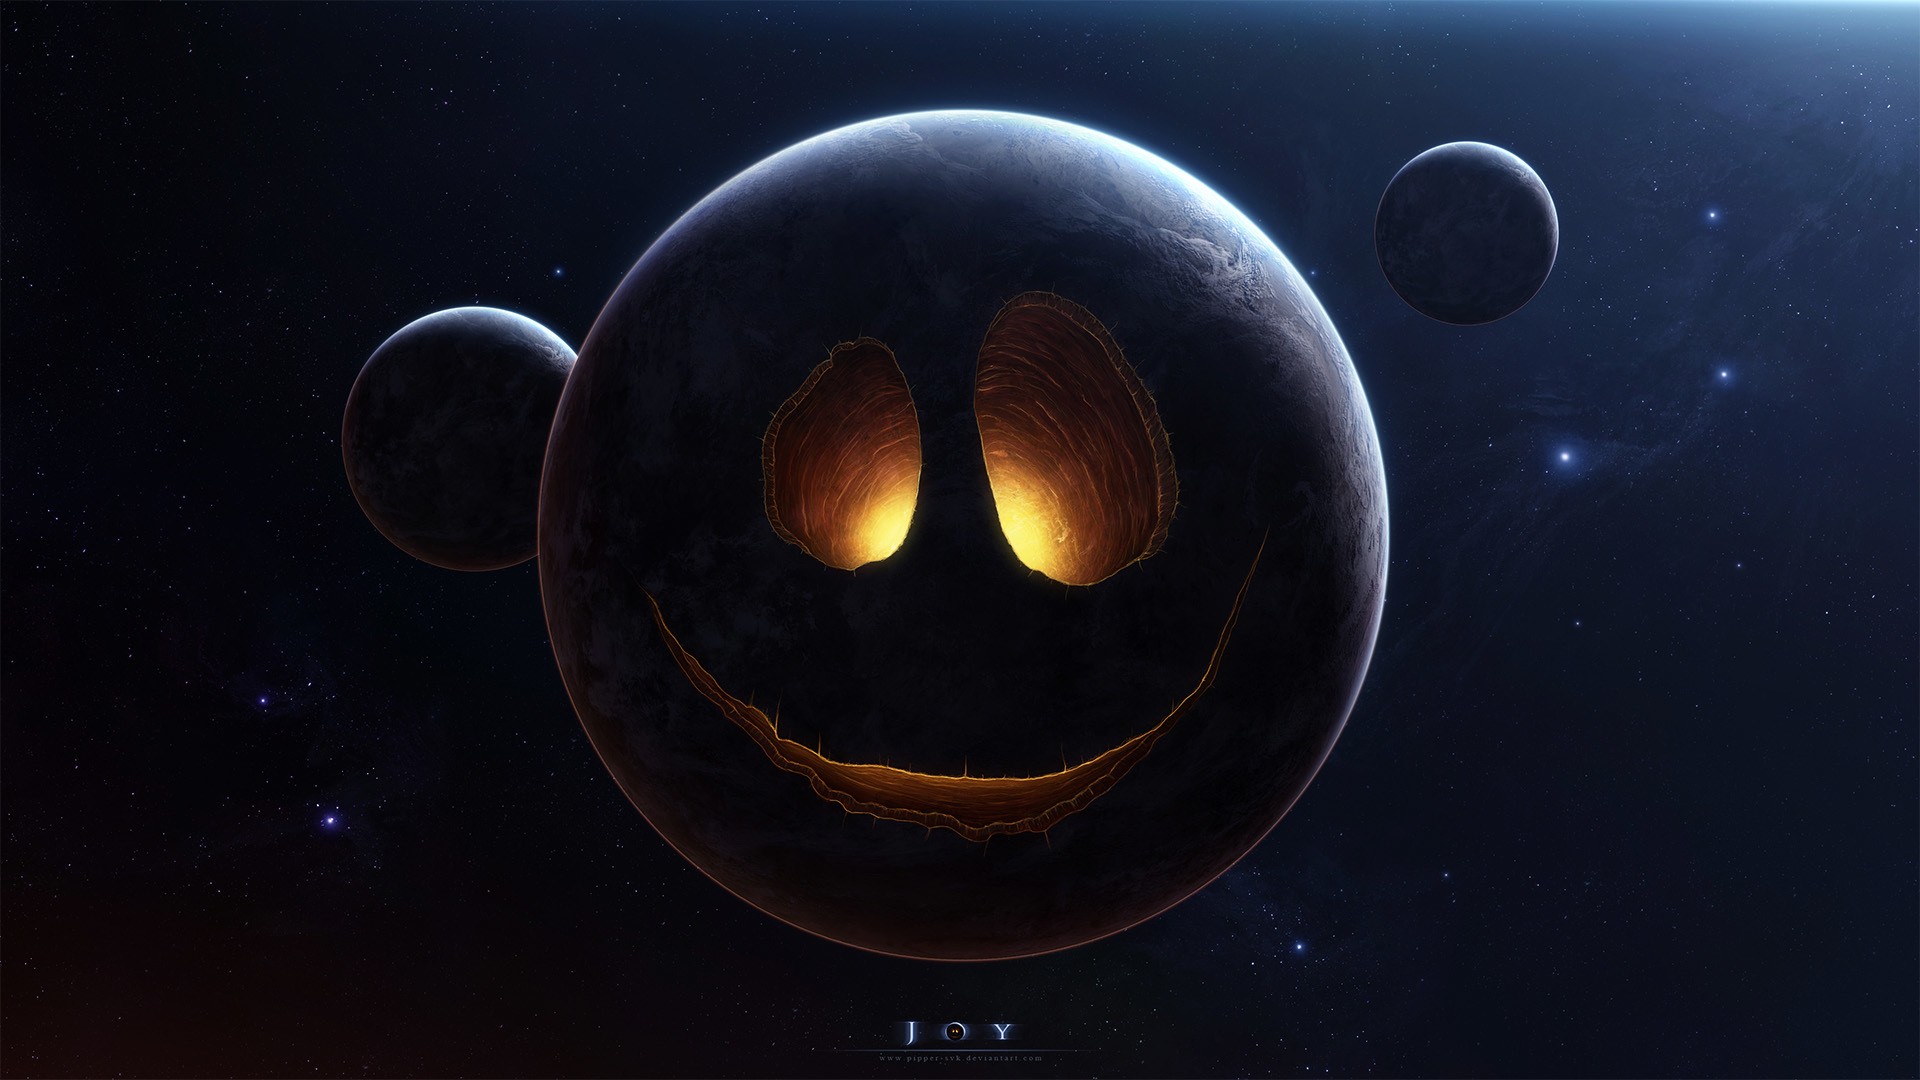 Pla Face Stars Humor Funny Smiley Space Halloween Wallpaper